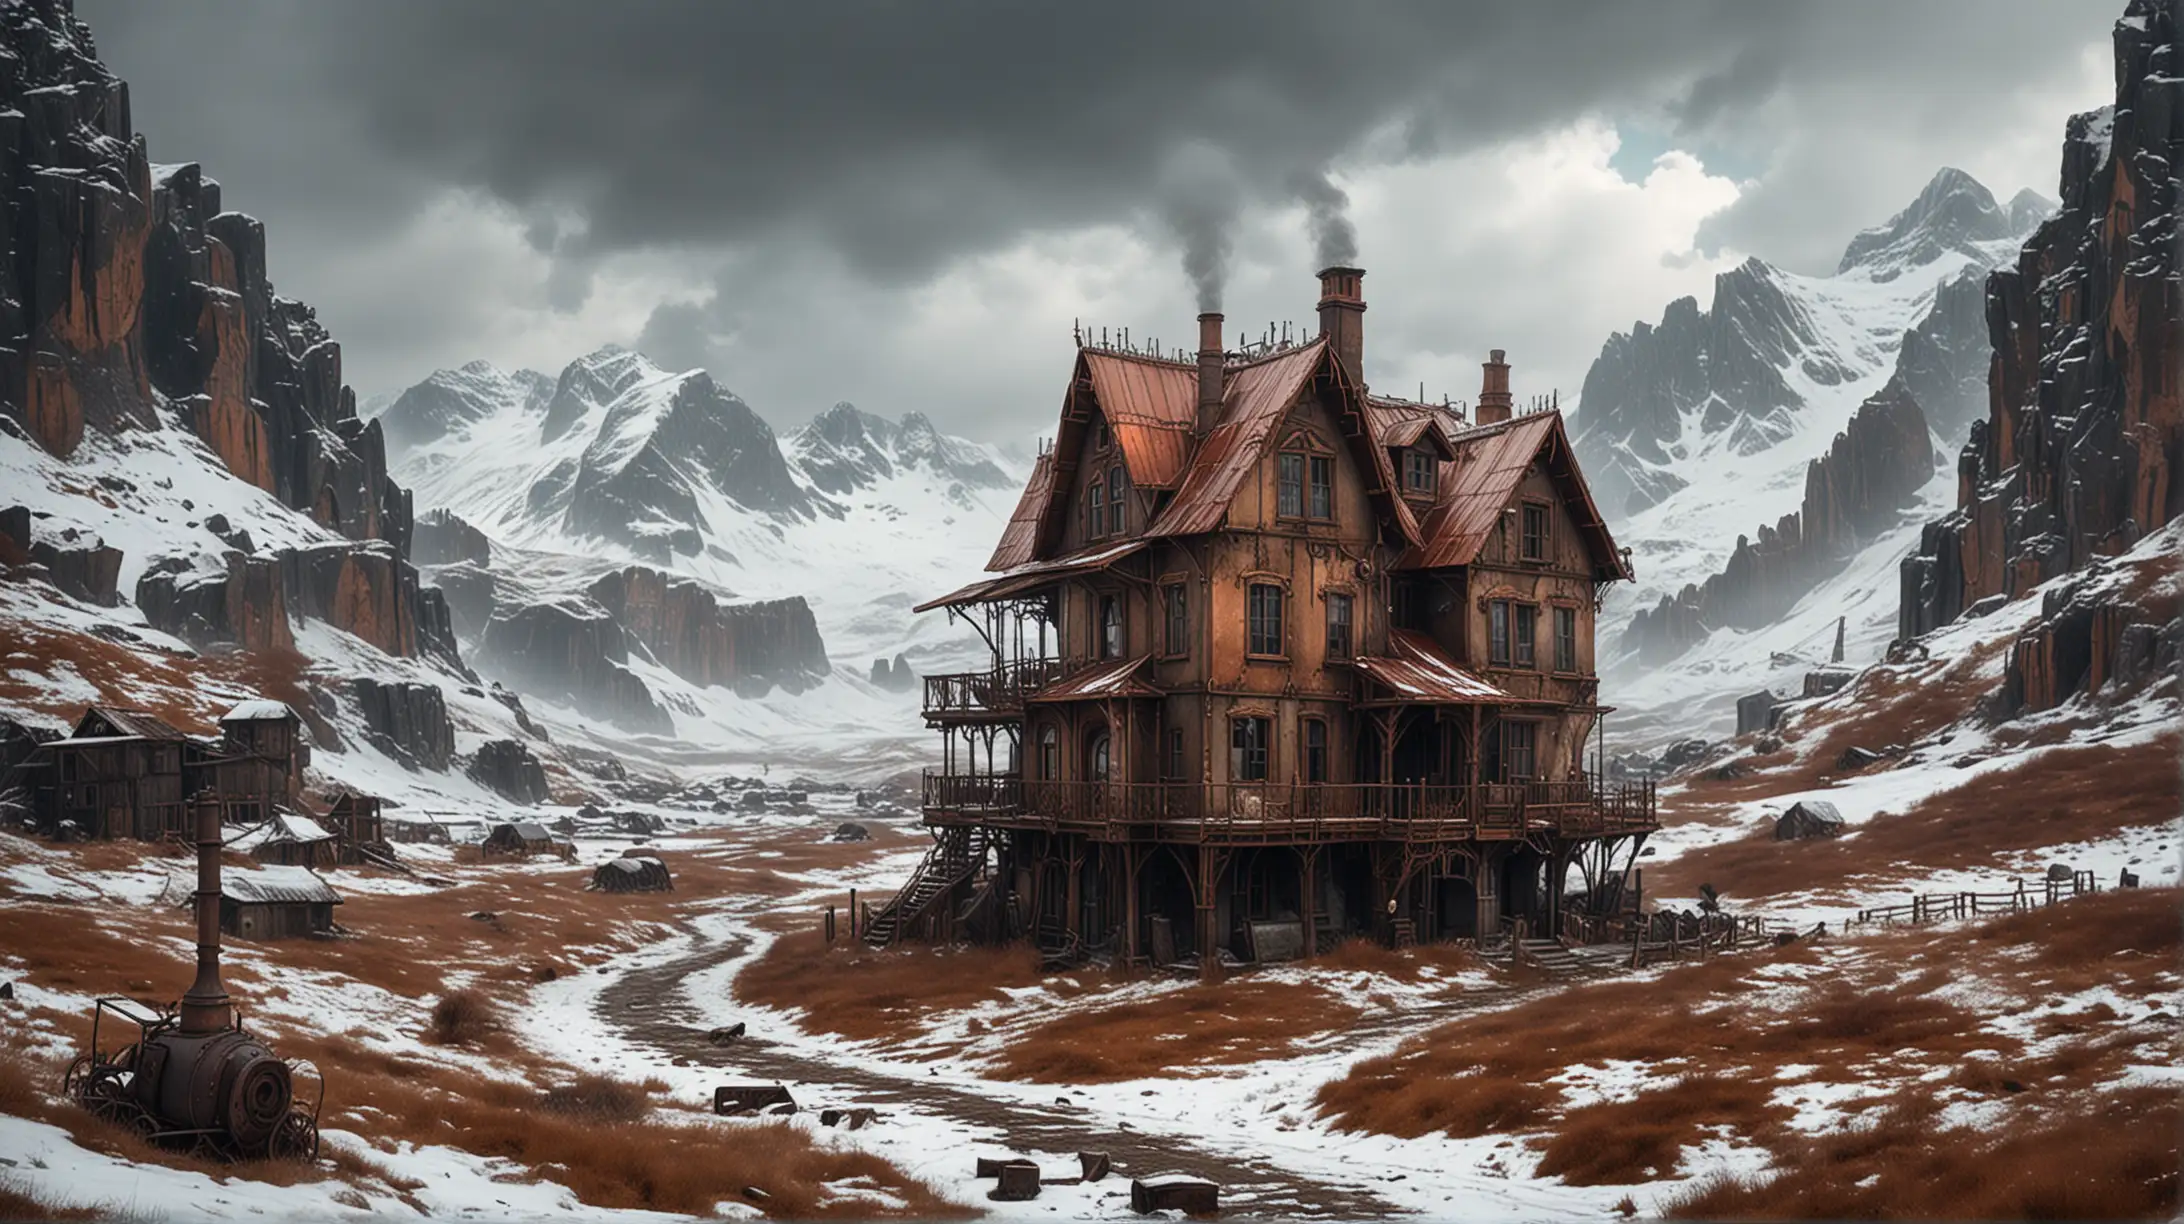 A lonely half ruined steampunk house in a valley between high mounts with snow ot their tops, copper and wood, cold and cloudy